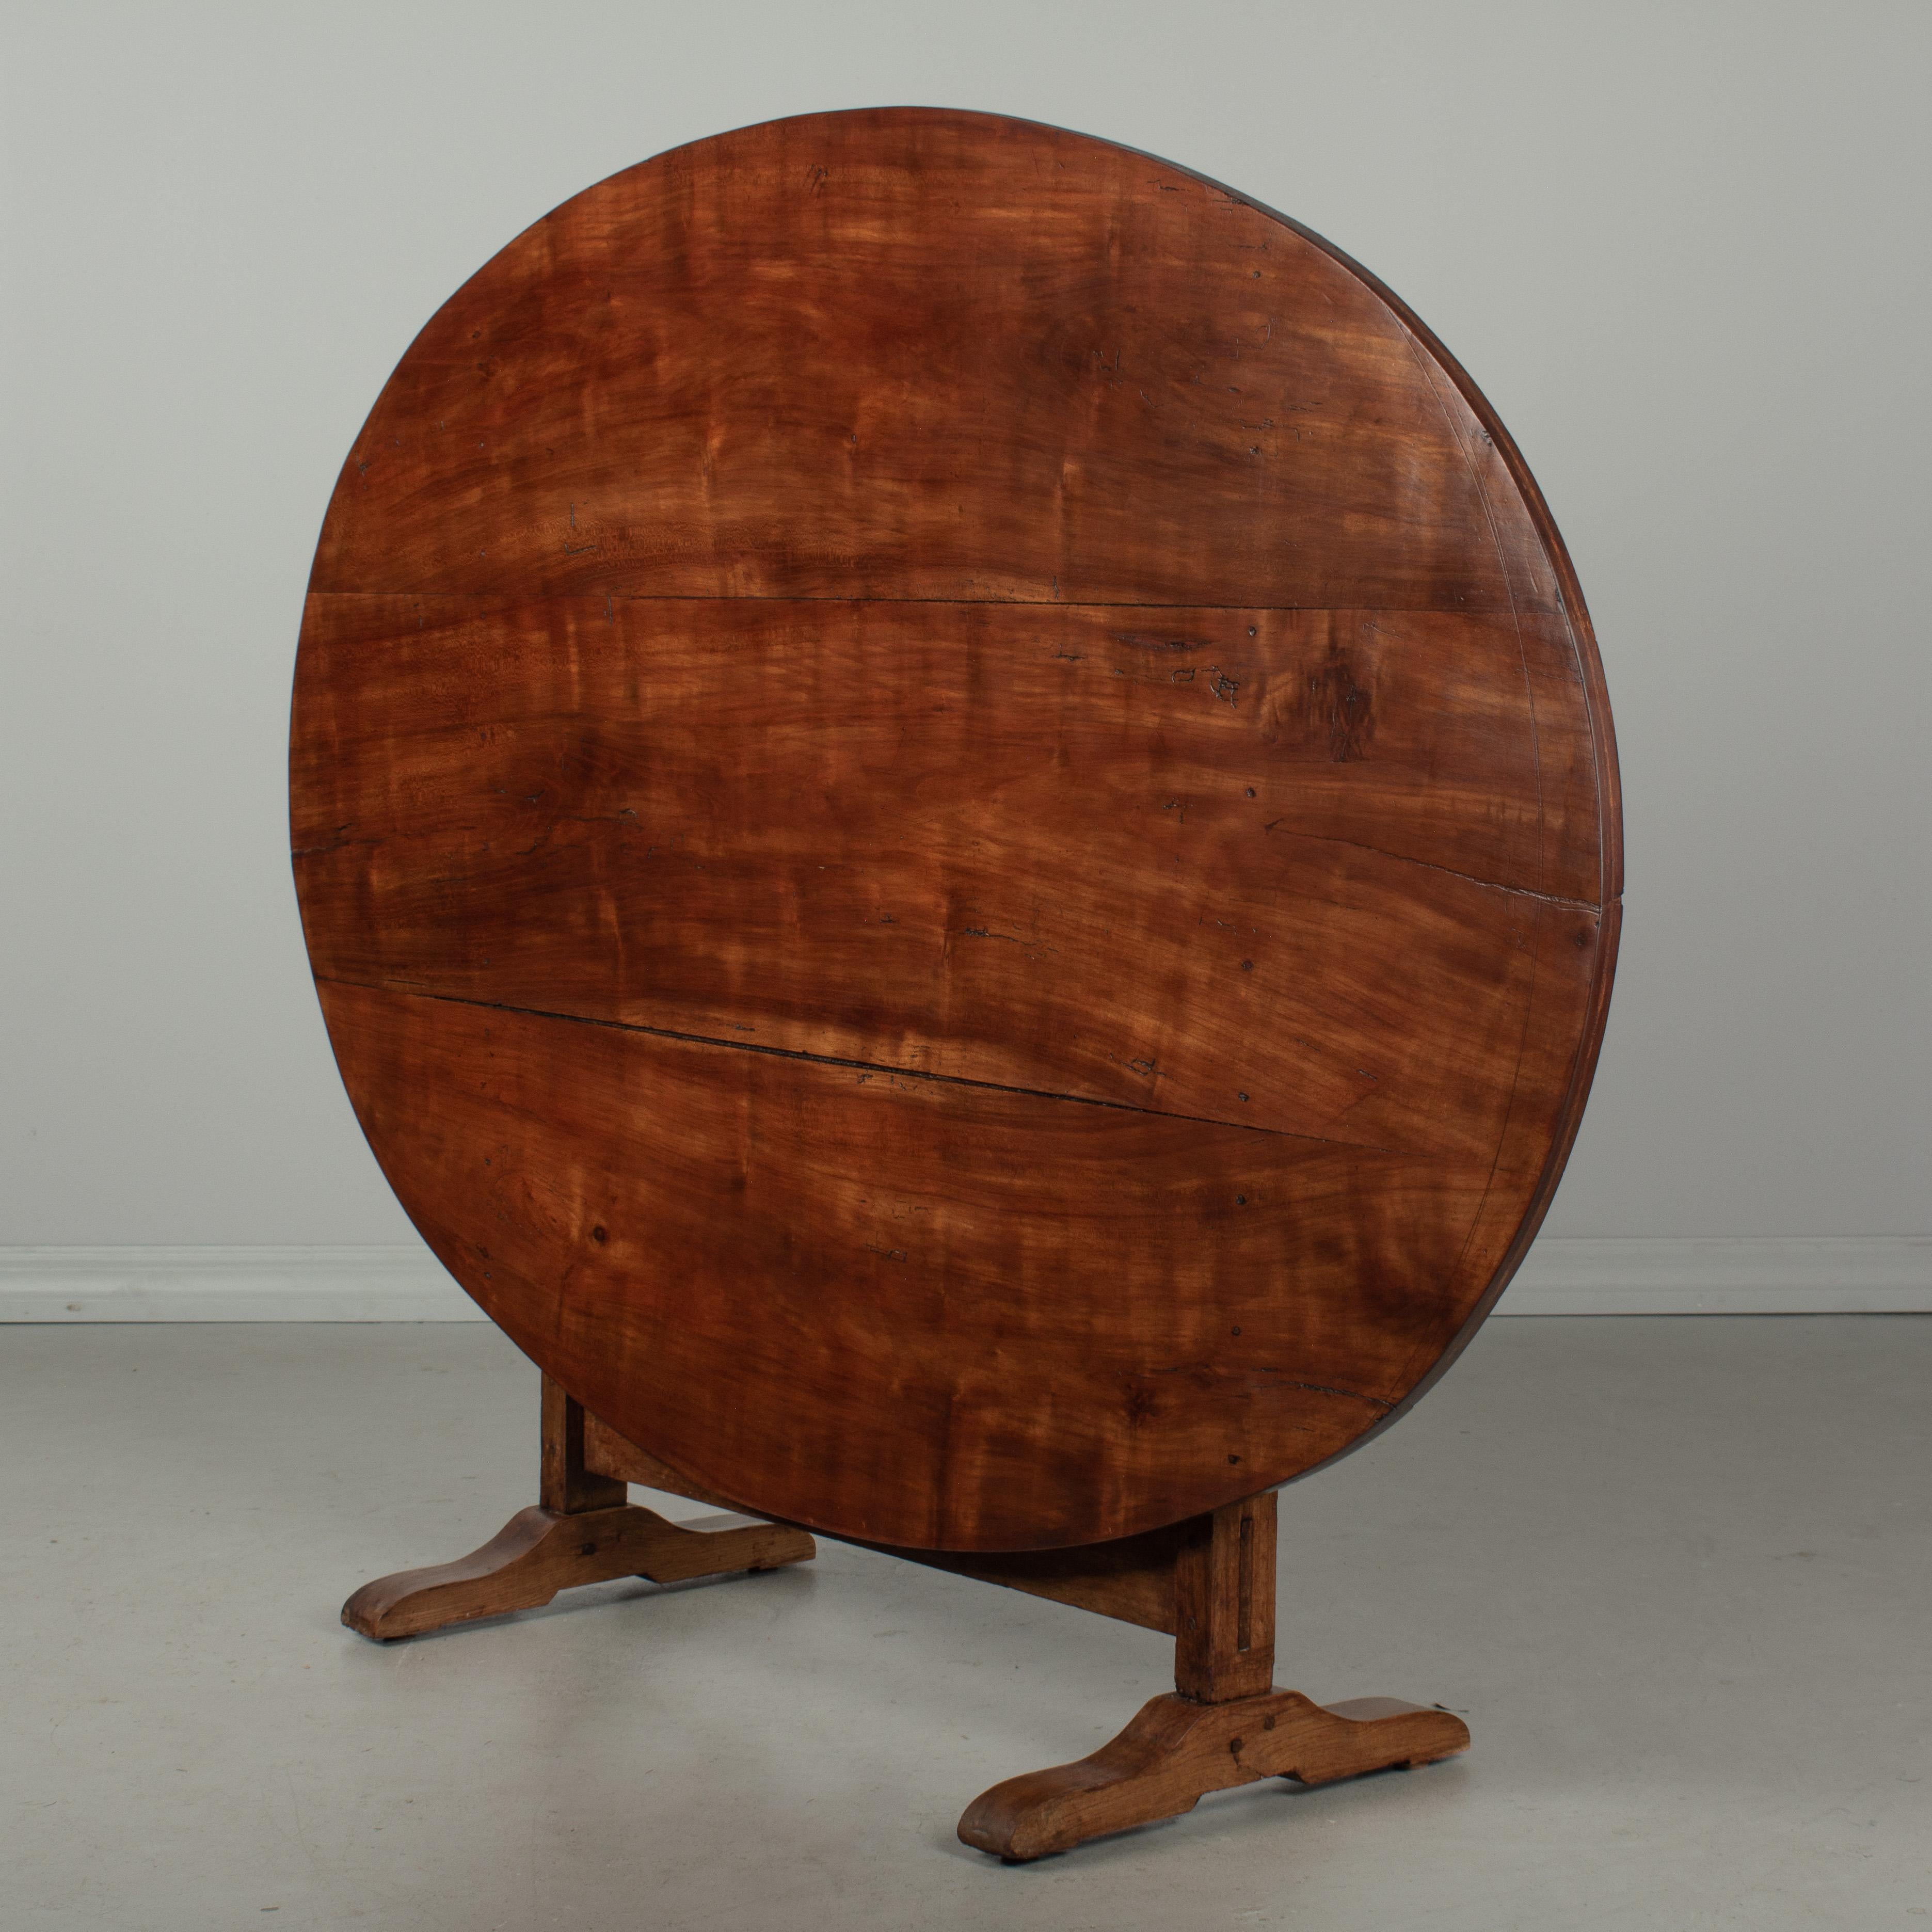 A French wine tasting, or tilt-top table, made of solid cherry. The large oval top is made from three planks of wood and the base is sturdy and well-crafted with mortise and tenon joints and pegged construction. The table top was once covered in